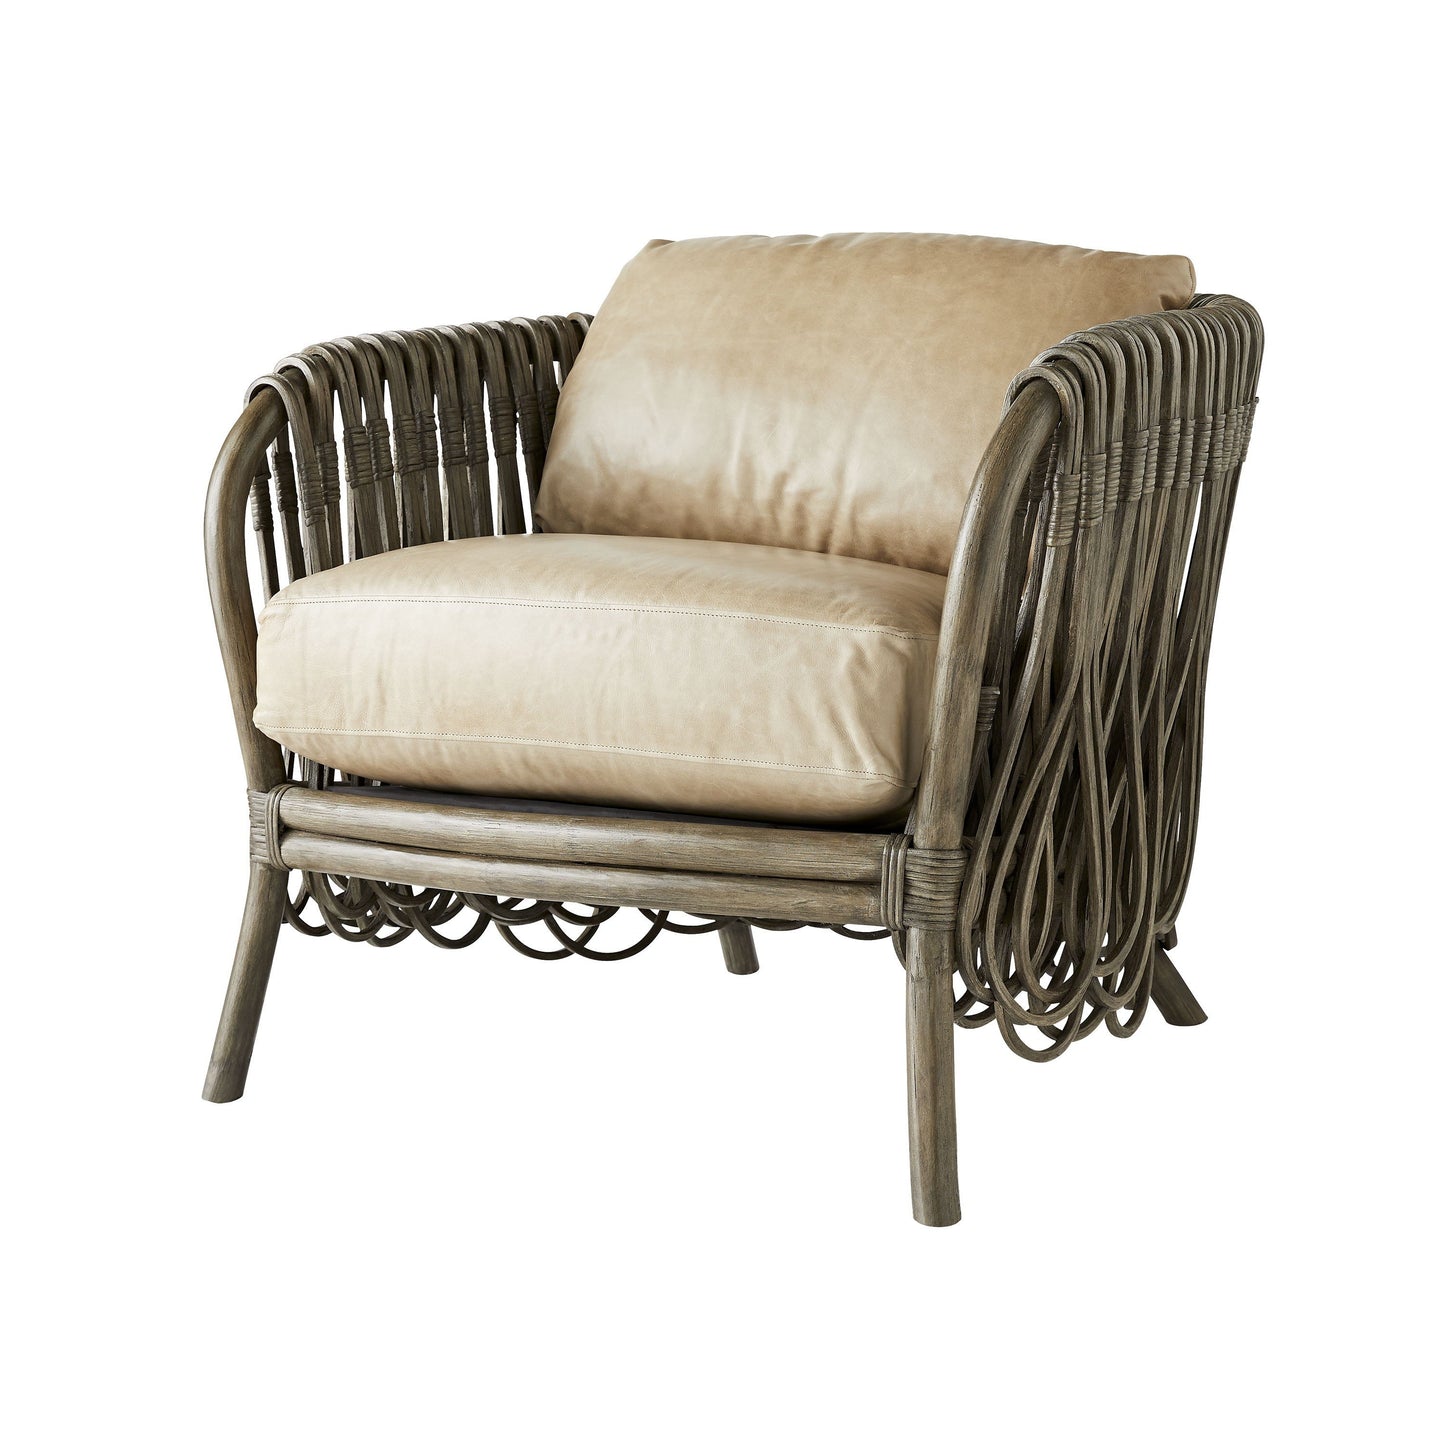 Strata Lounge Chair Gray Washed Rattan and Leather